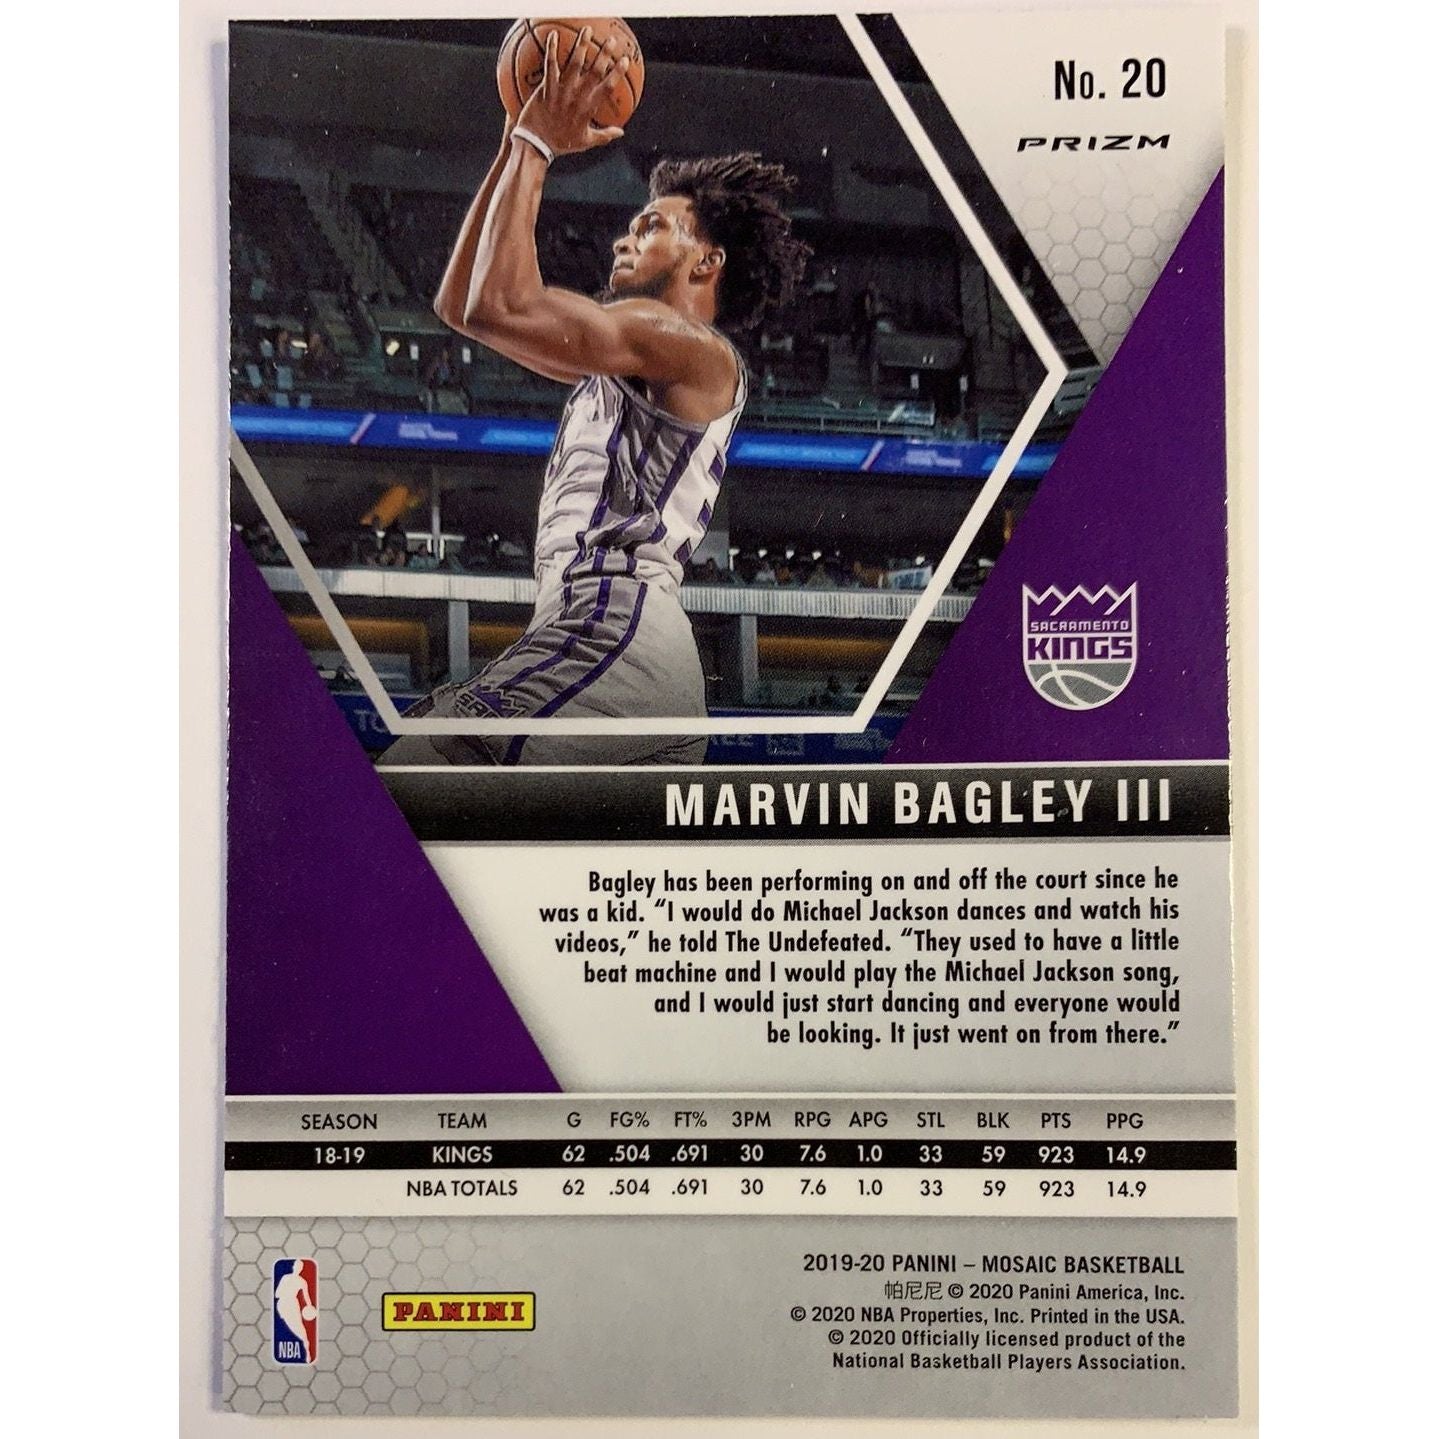  2019-20 Mosaic Marvin Bagley III Green Prizm  Local Legends Cards & Collectibles